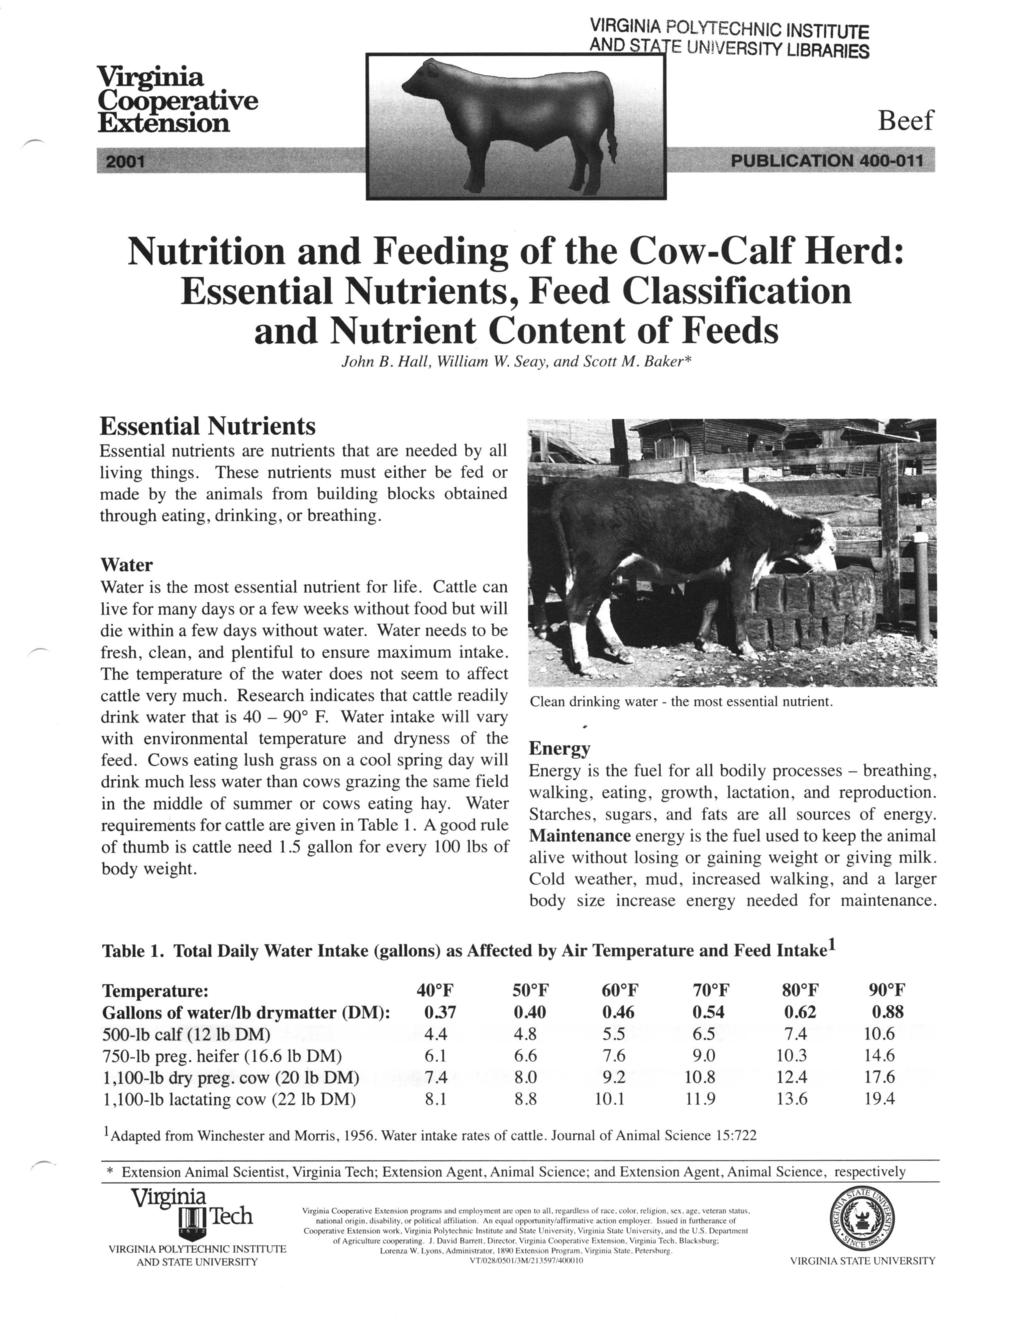 VIrginia Cooperative Extension VIRGINIA POLYTECHNIC INSTITUTE UNIVERSITY LIBRARIES Beef Nutrition and Feeding of the Cow-Calf Herd: Essential Nutrients, Feed Classification and Nutrient Content of